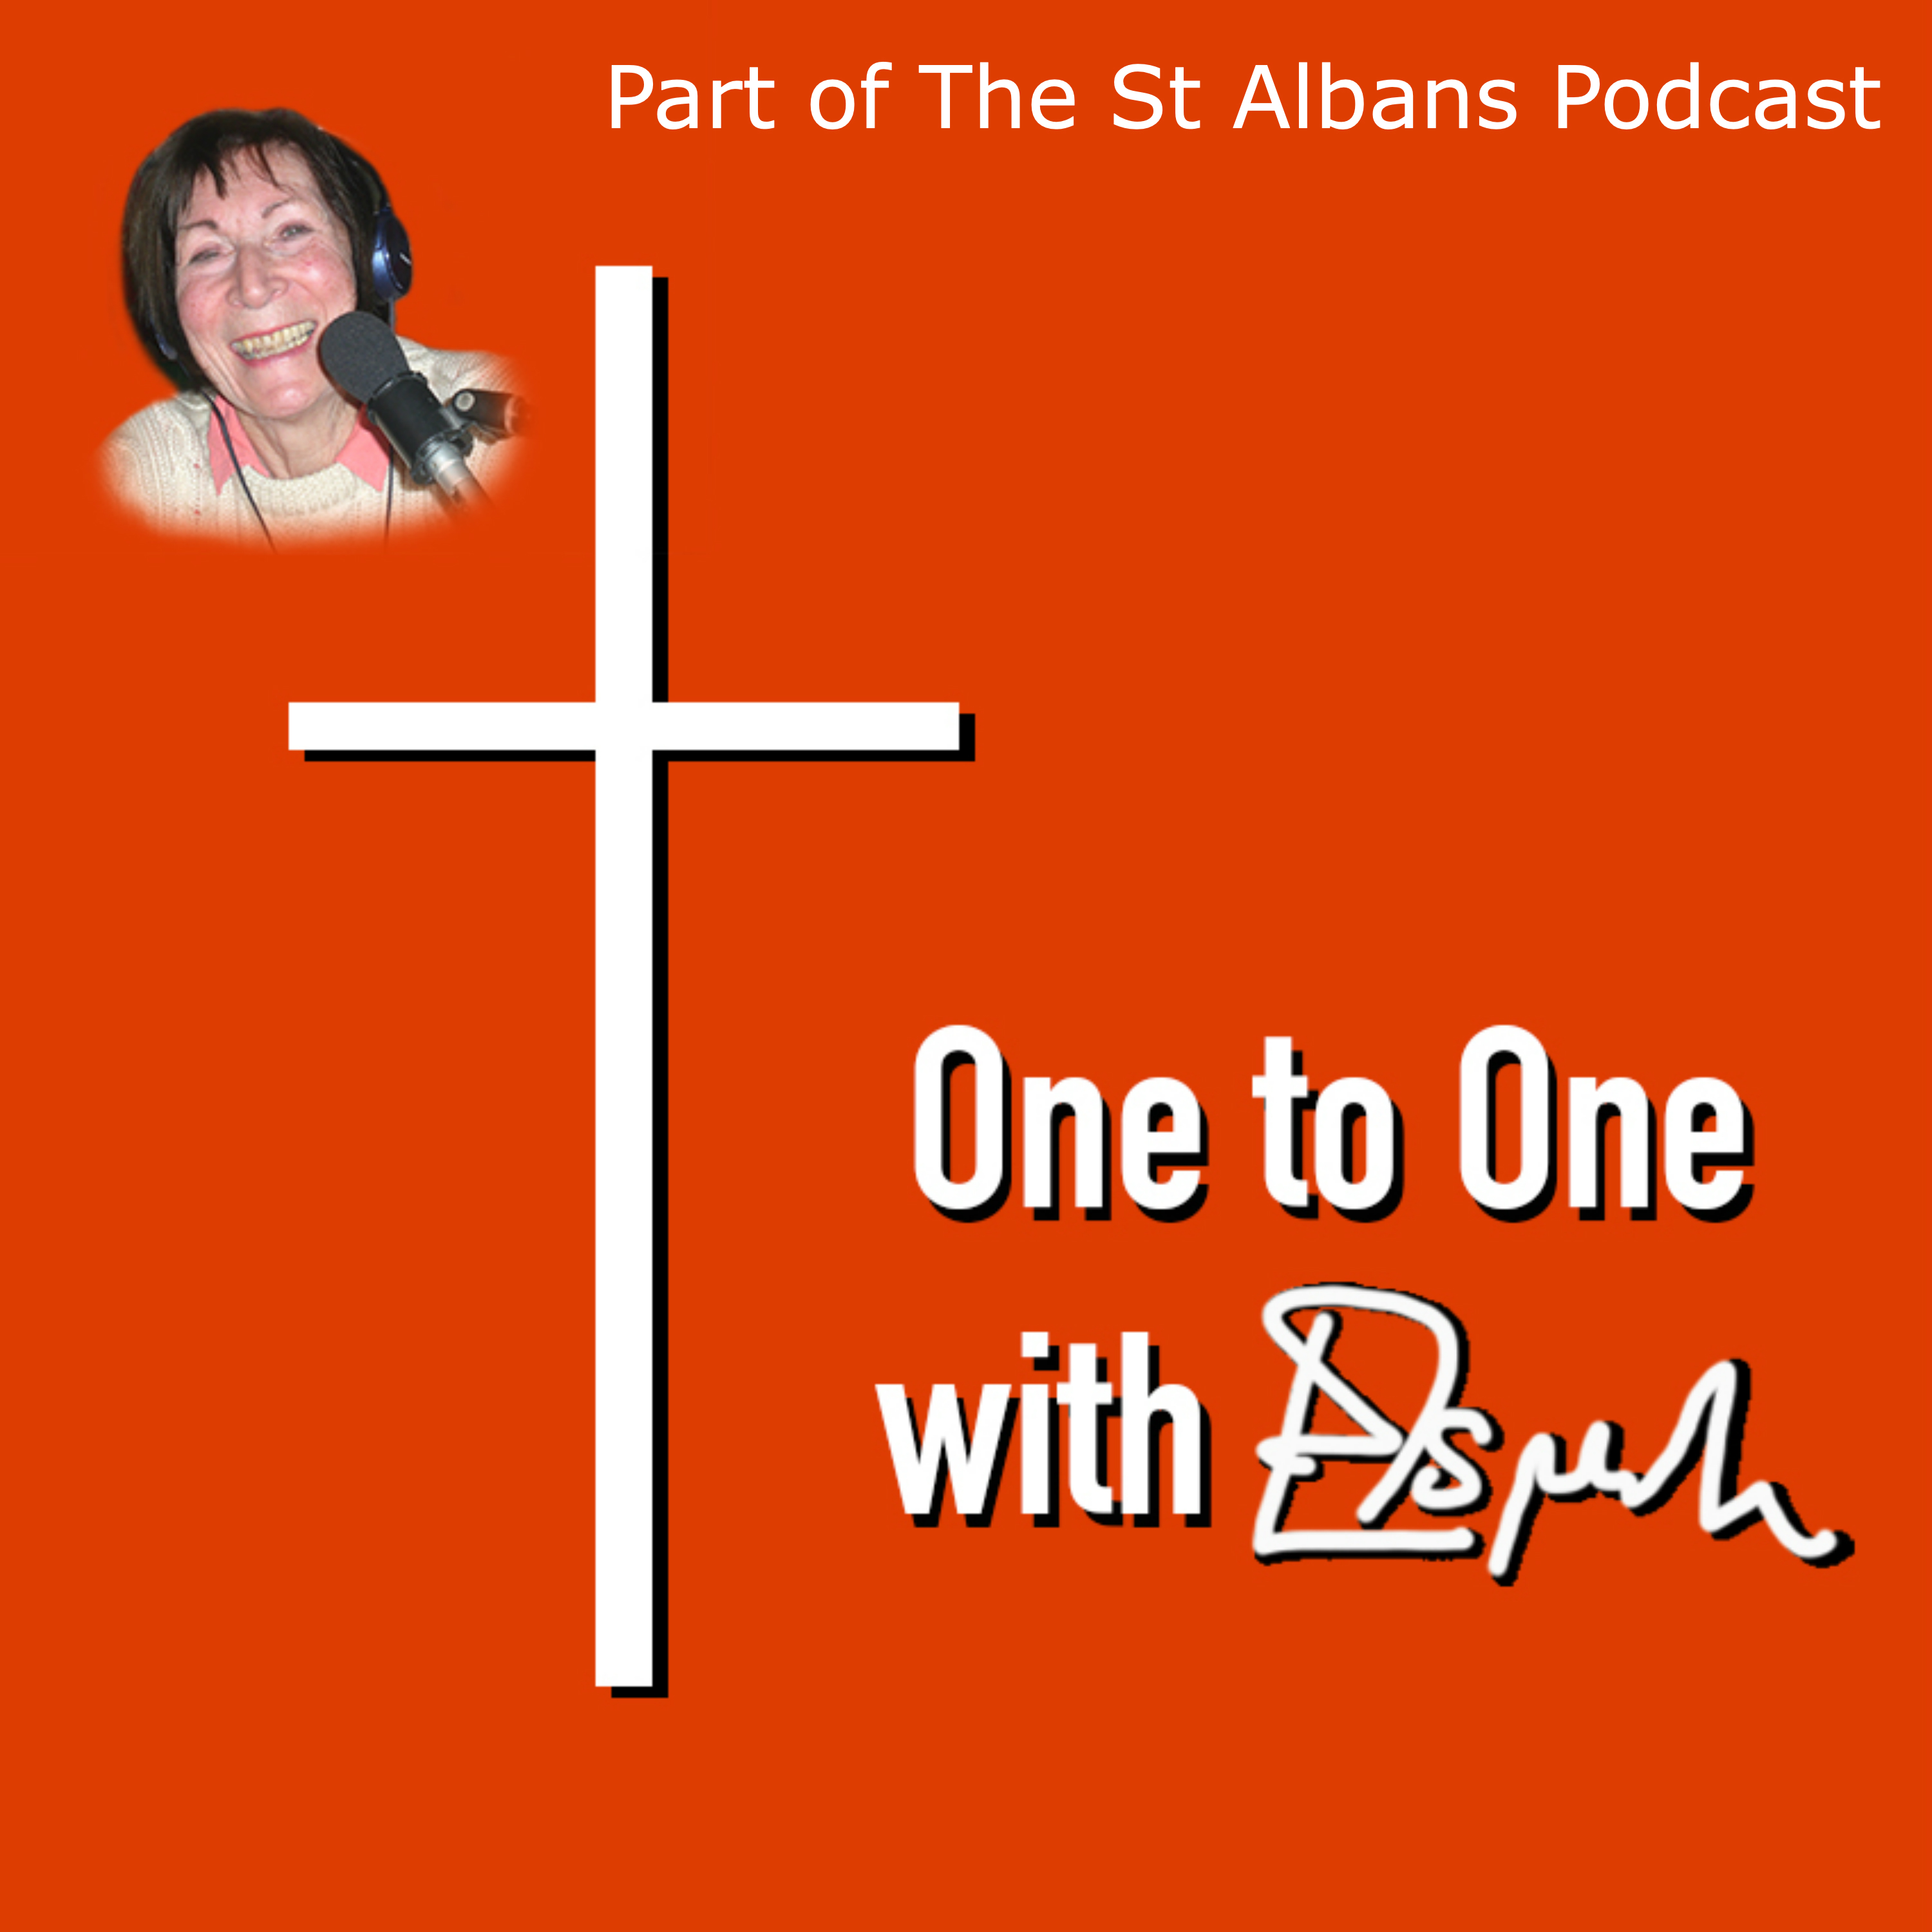 St Albans Podcast:  One To One With Elspeth